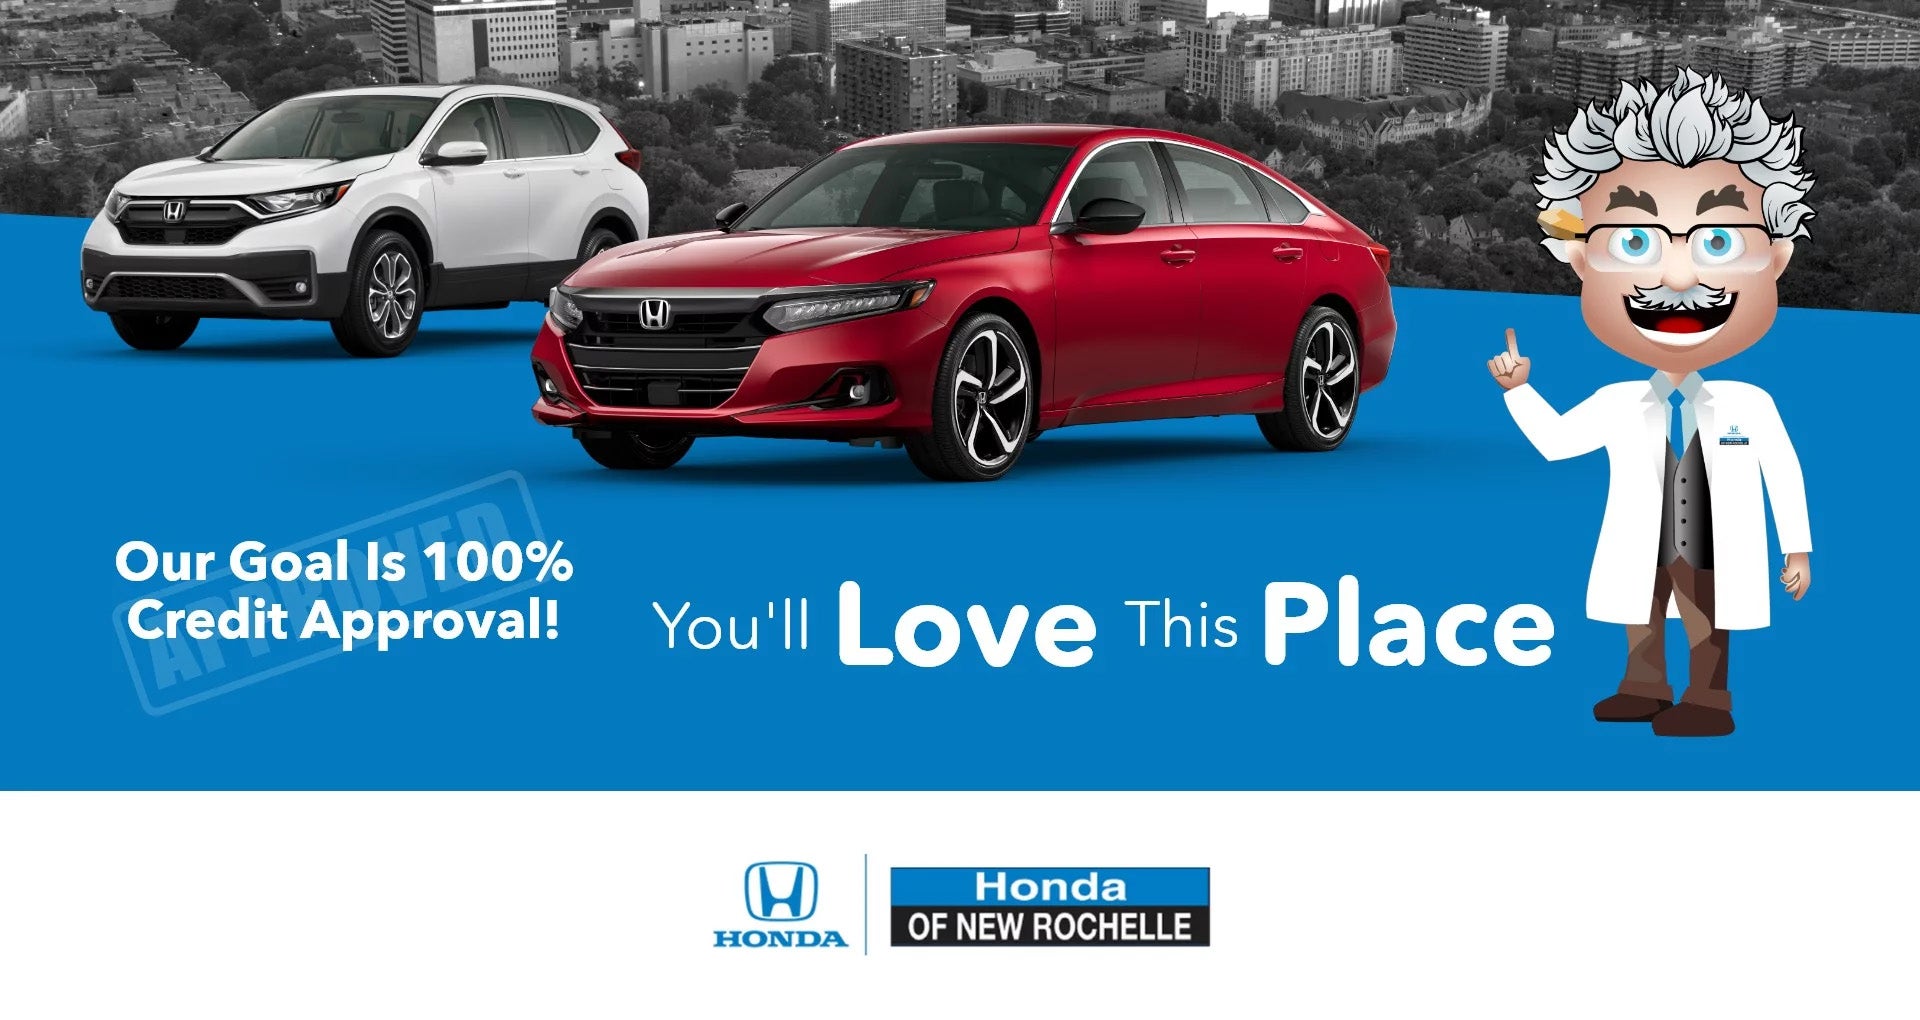 Our goal is 100% credit approval | Honda of New Rochelle in New Rochelle NY